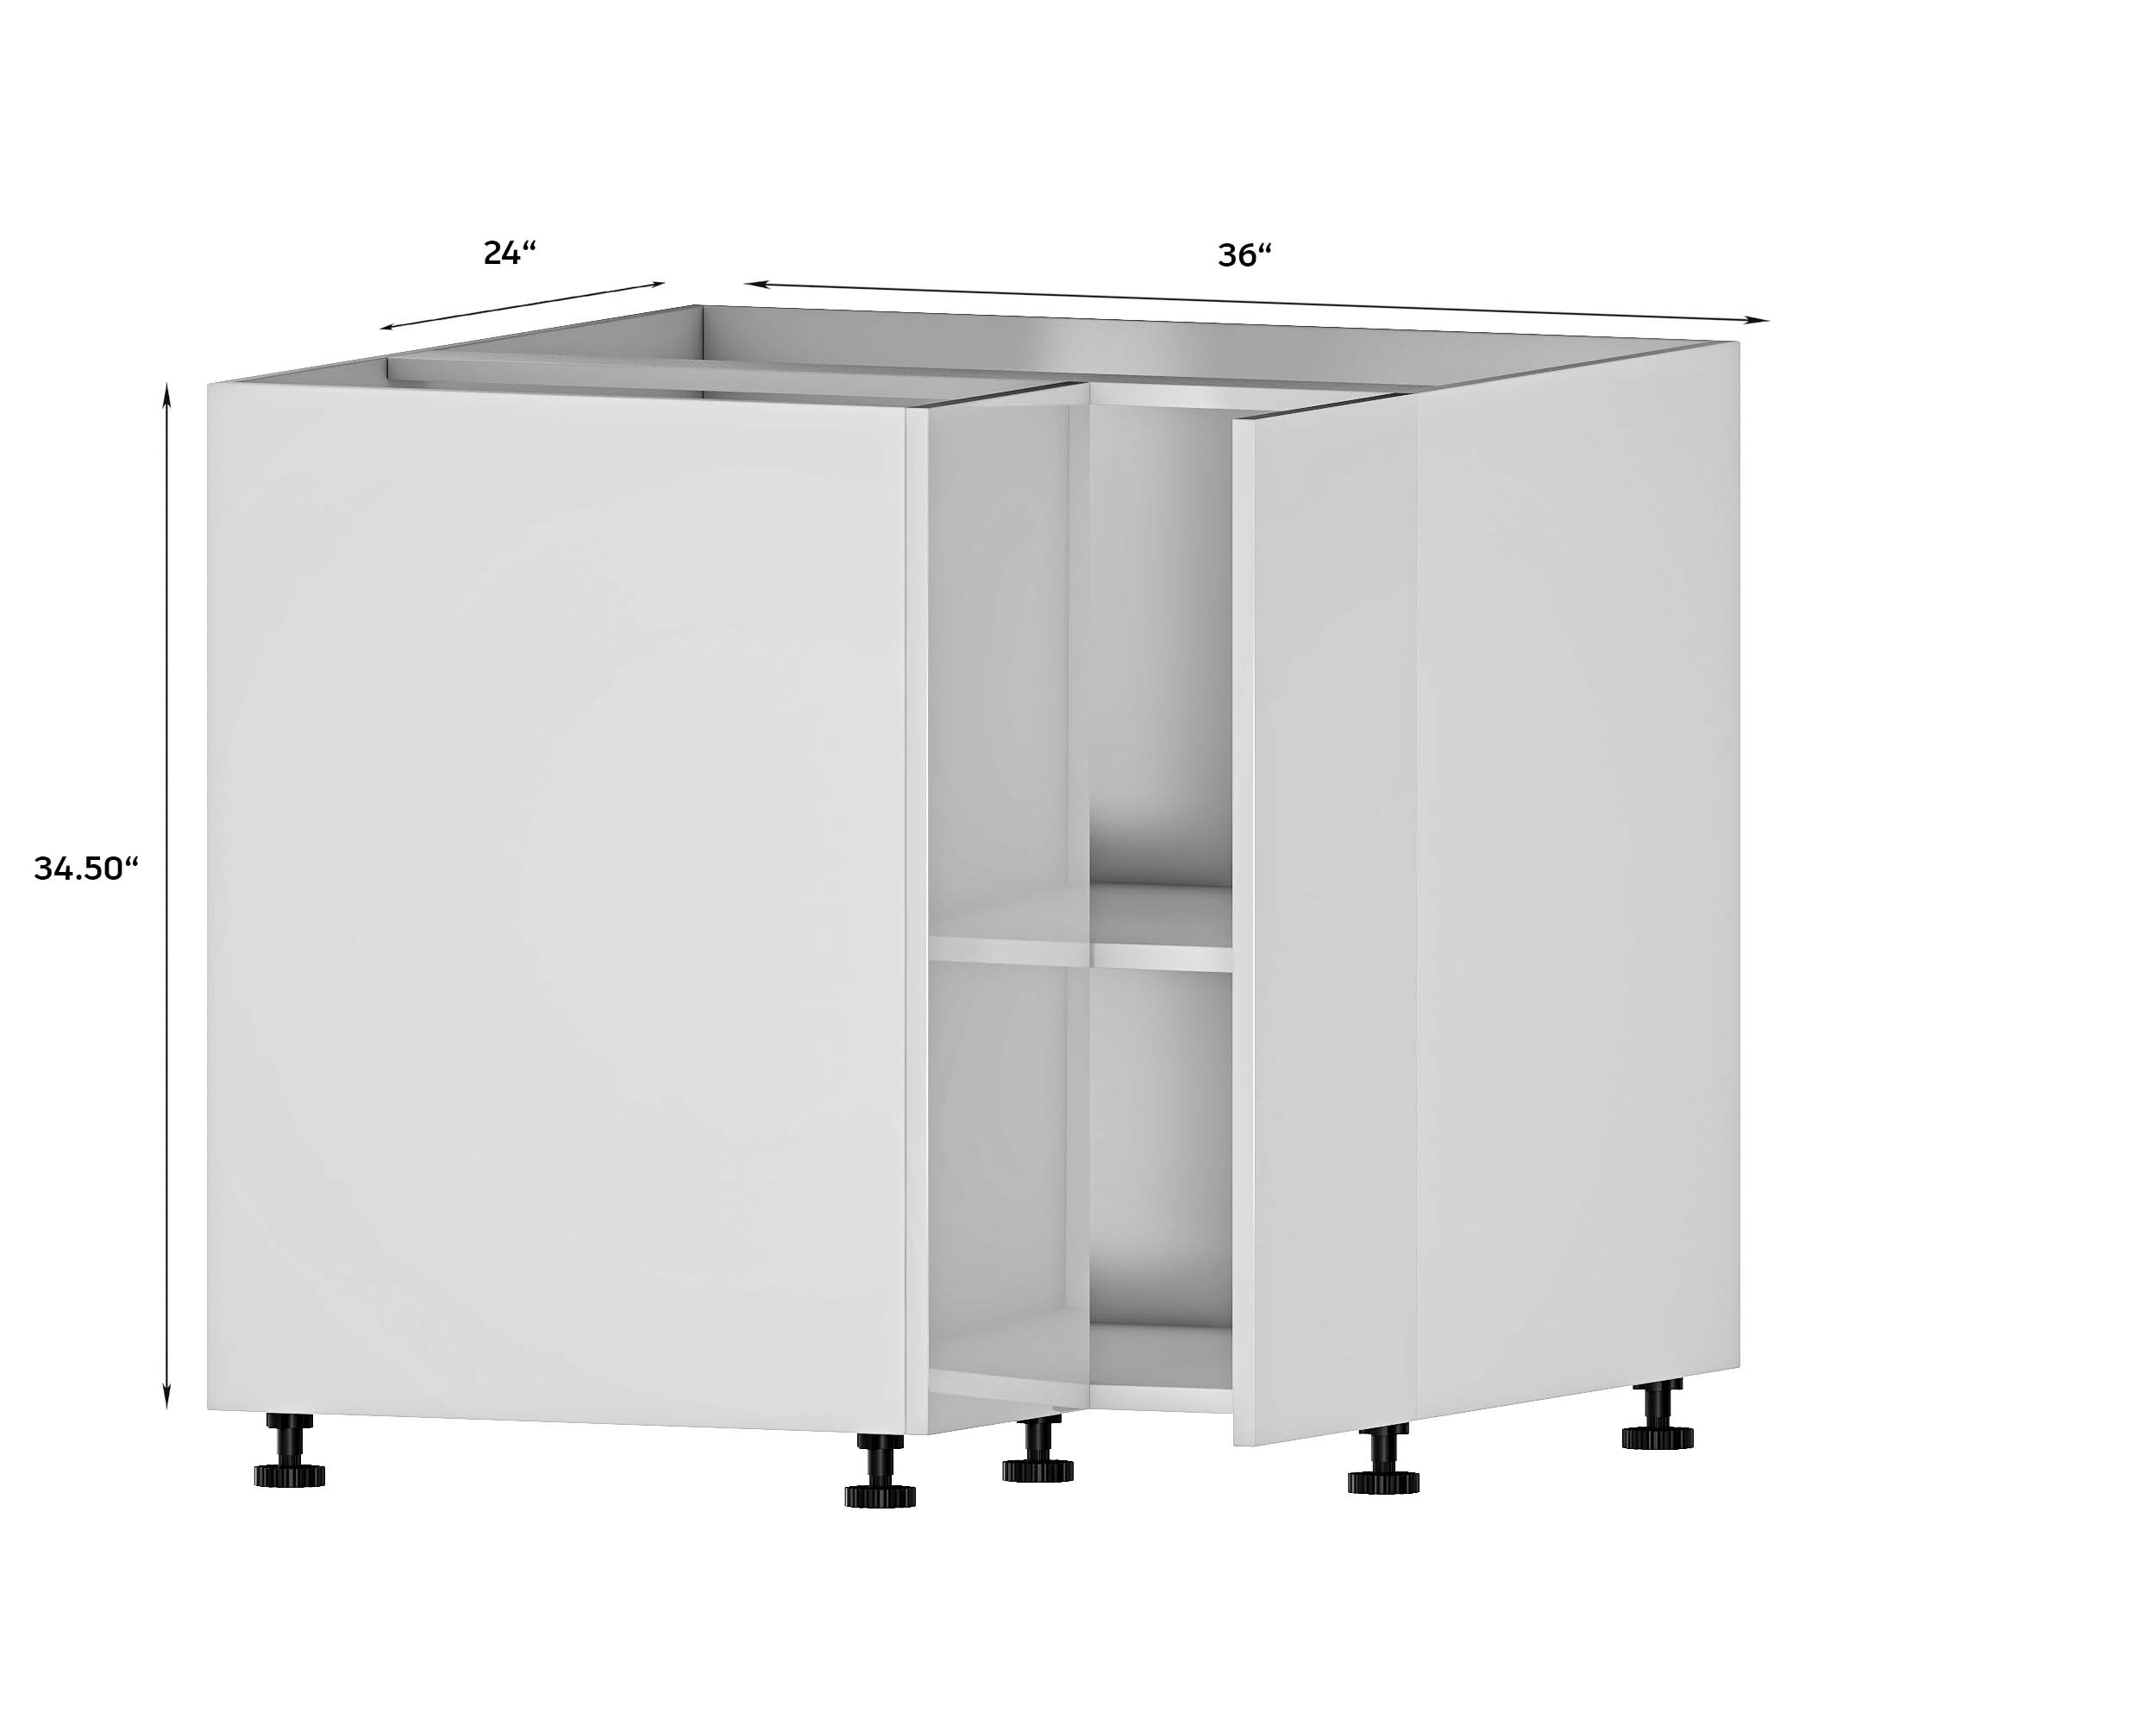 Quick Assemble Modern Style with Soft Close 36 in Lazy Susan Base Kitchen Cabinet (36 in W x 24 in D x 34.50 in H) -  Pro-Edge HD